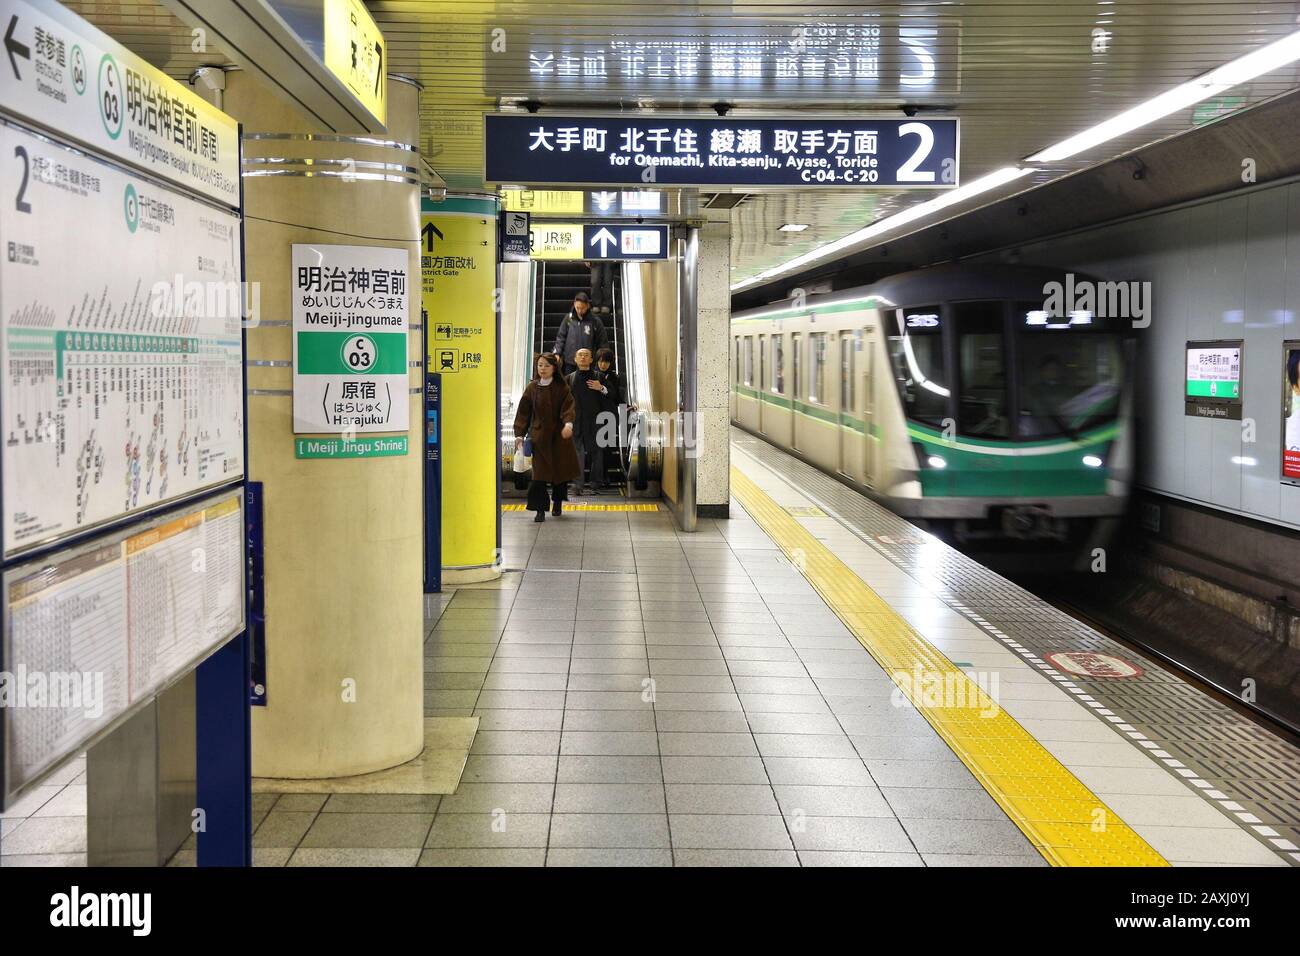 TOKYO, JAPAN - DECEMBER 4, 2016: People wait for train of Tokyo Metro. Toei Subway and Tokyo Metro have 285 stations and have 8.7 million daily users. Stock Photo